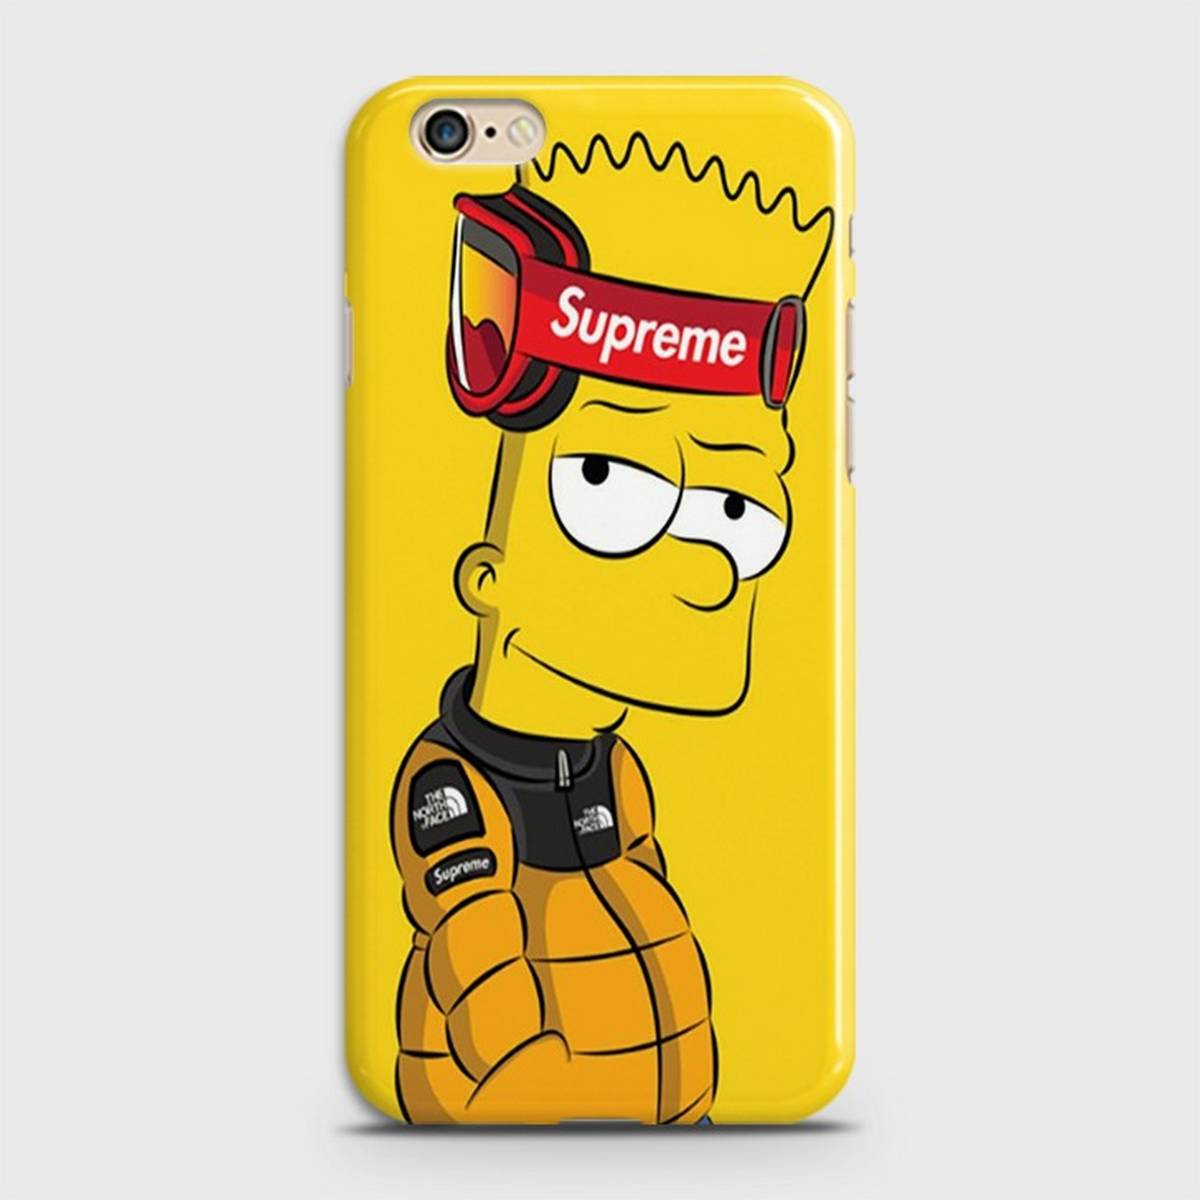 Supreme iPhone 6/6s Cases & Cover